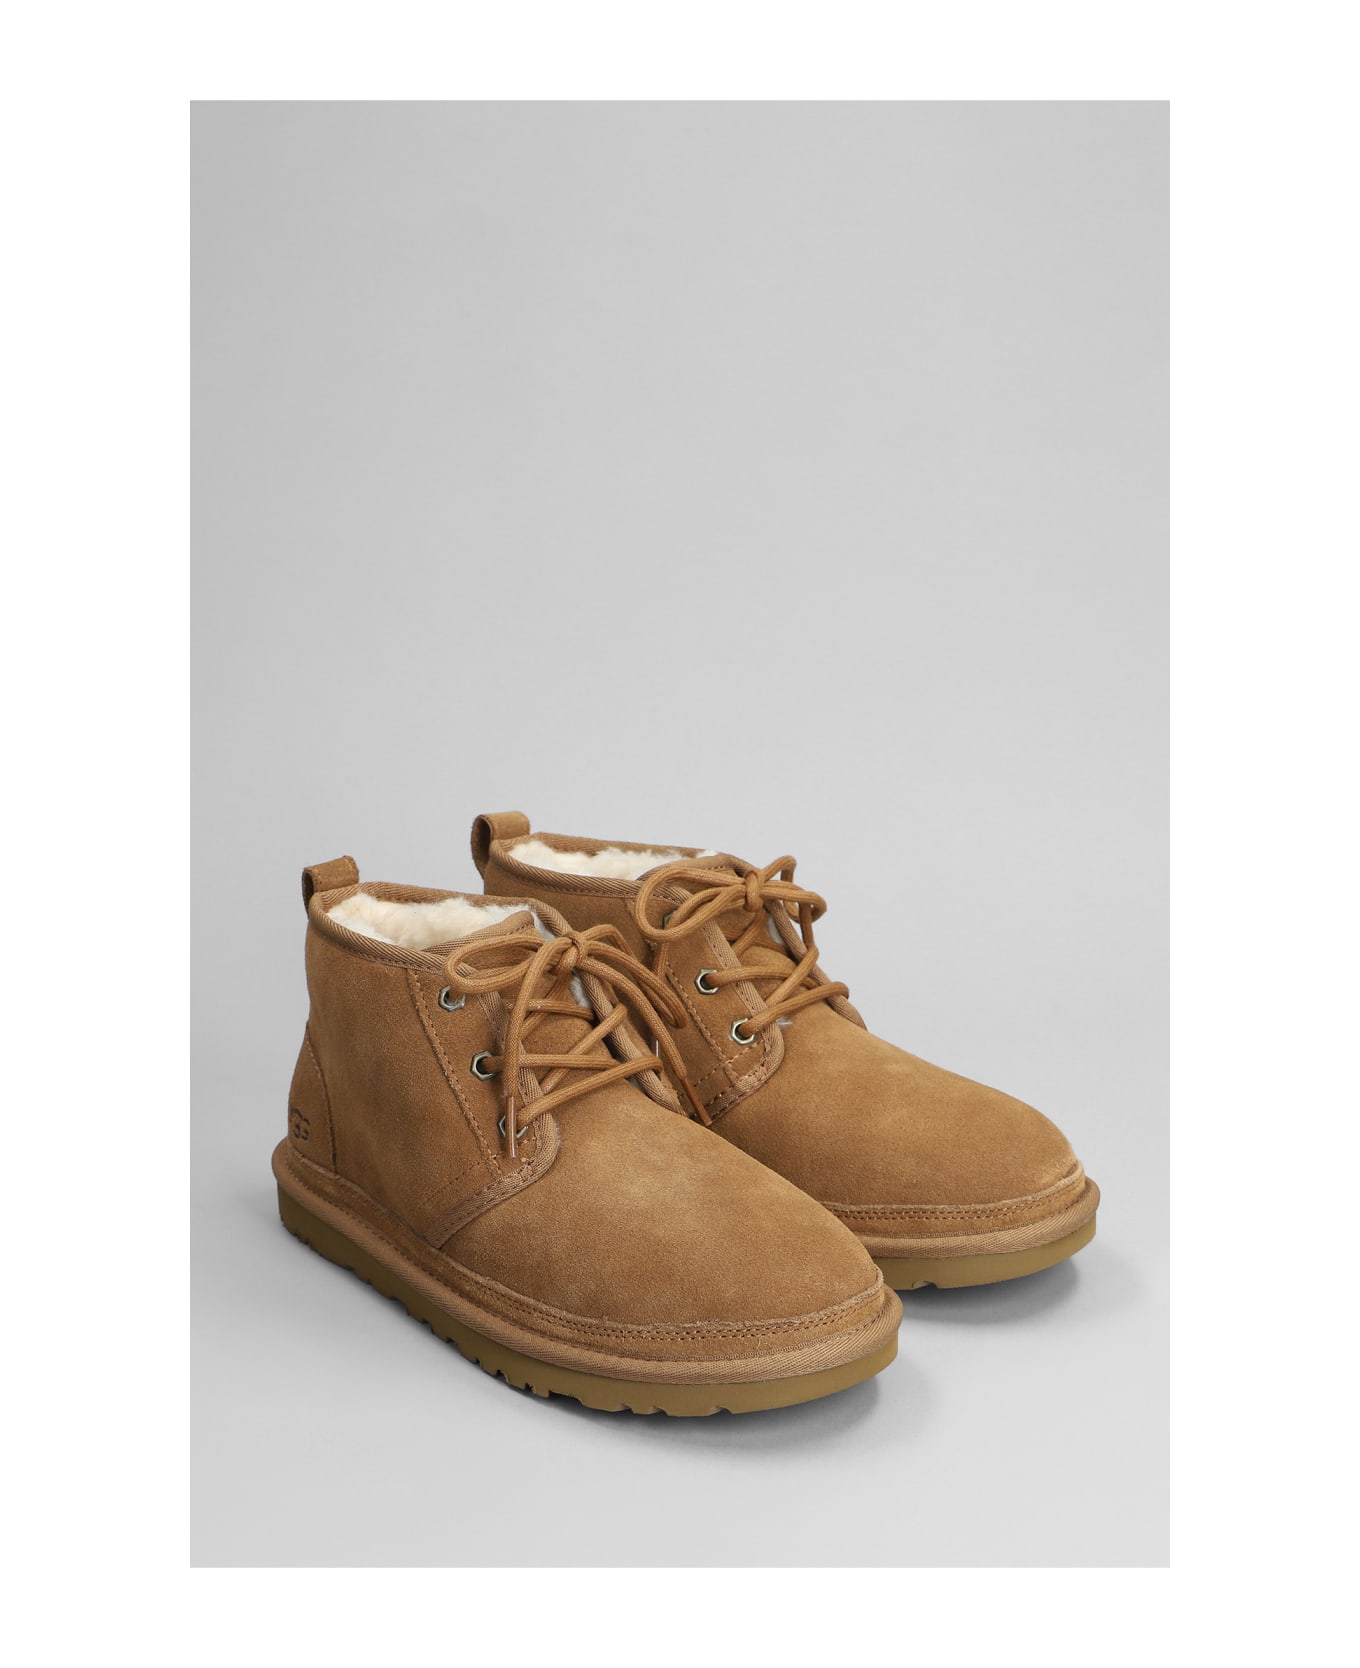 UGG Neumel Lace Up Shoes In Leather Color Suede - leather color